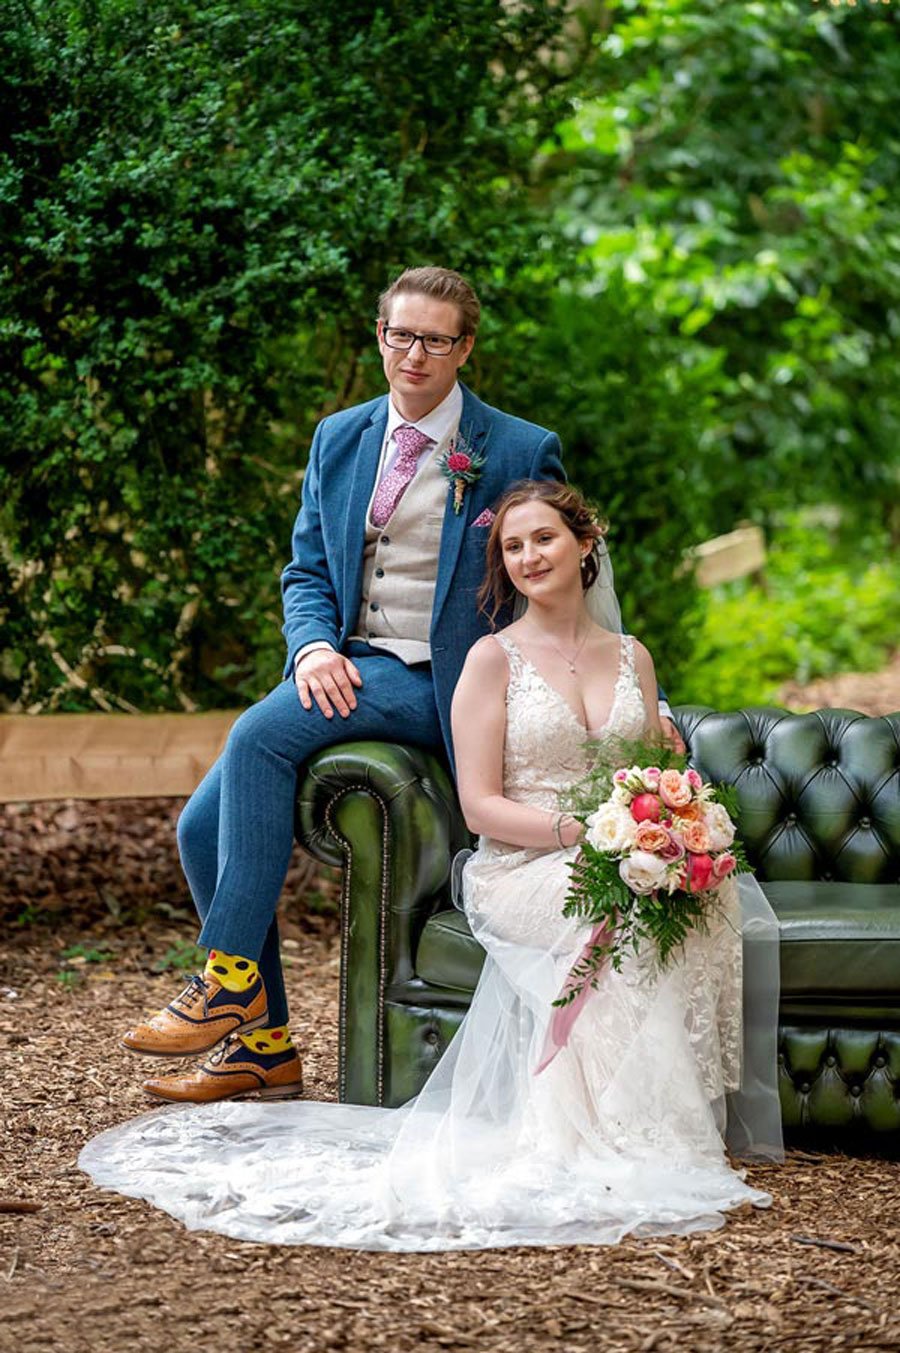  A bride is sat on a green Chesterfield sofa with the groom perched next to her on the arm. They are outside with green trees behind them.  The bride is wearing a v-neck, sleeveless white wedding dress and the train of the brides dress is trailing ov